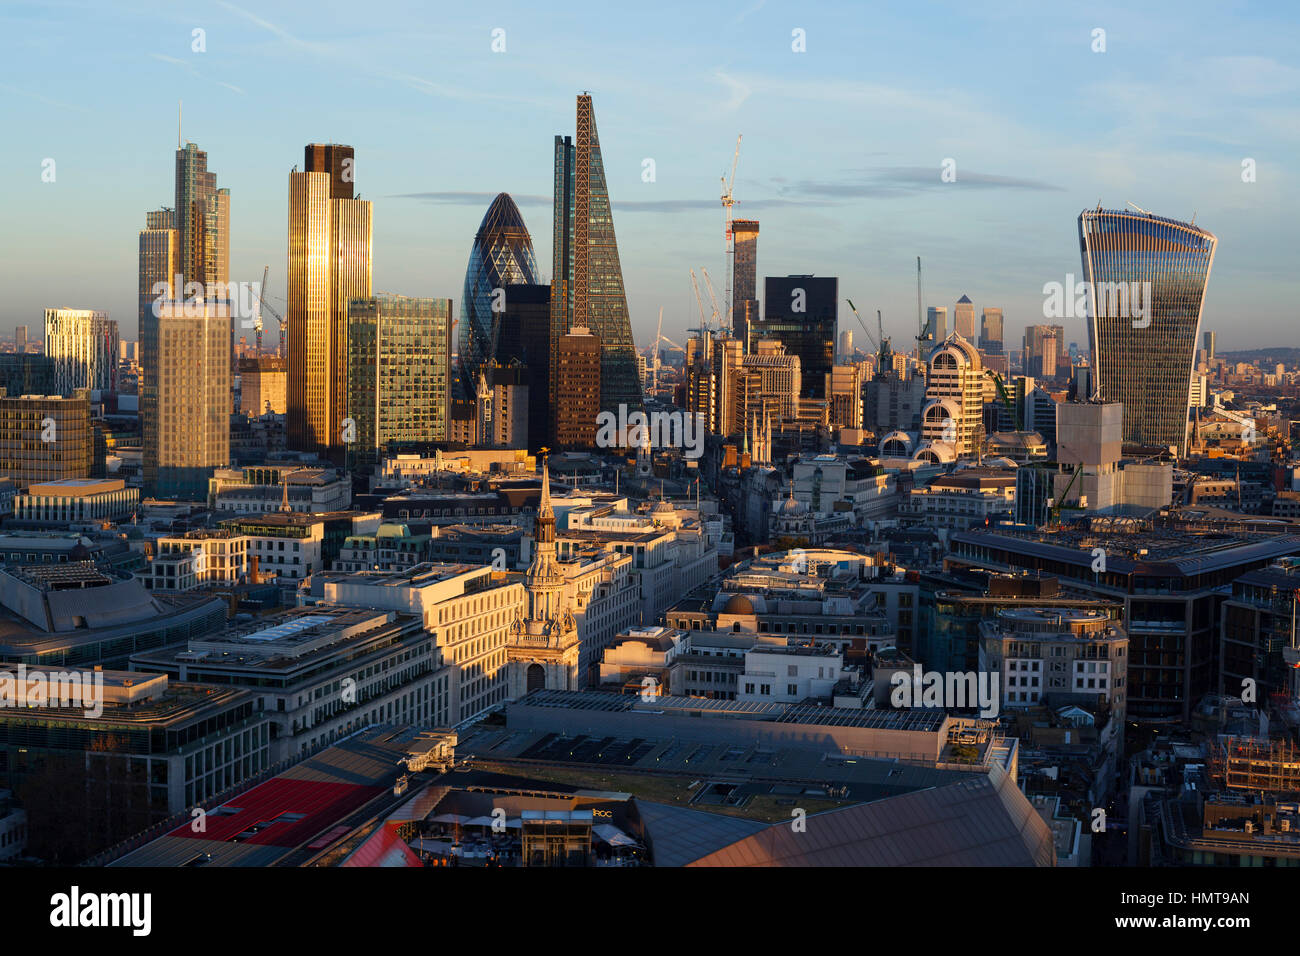 Elevated view of the financial district of London, England. Stock Photo